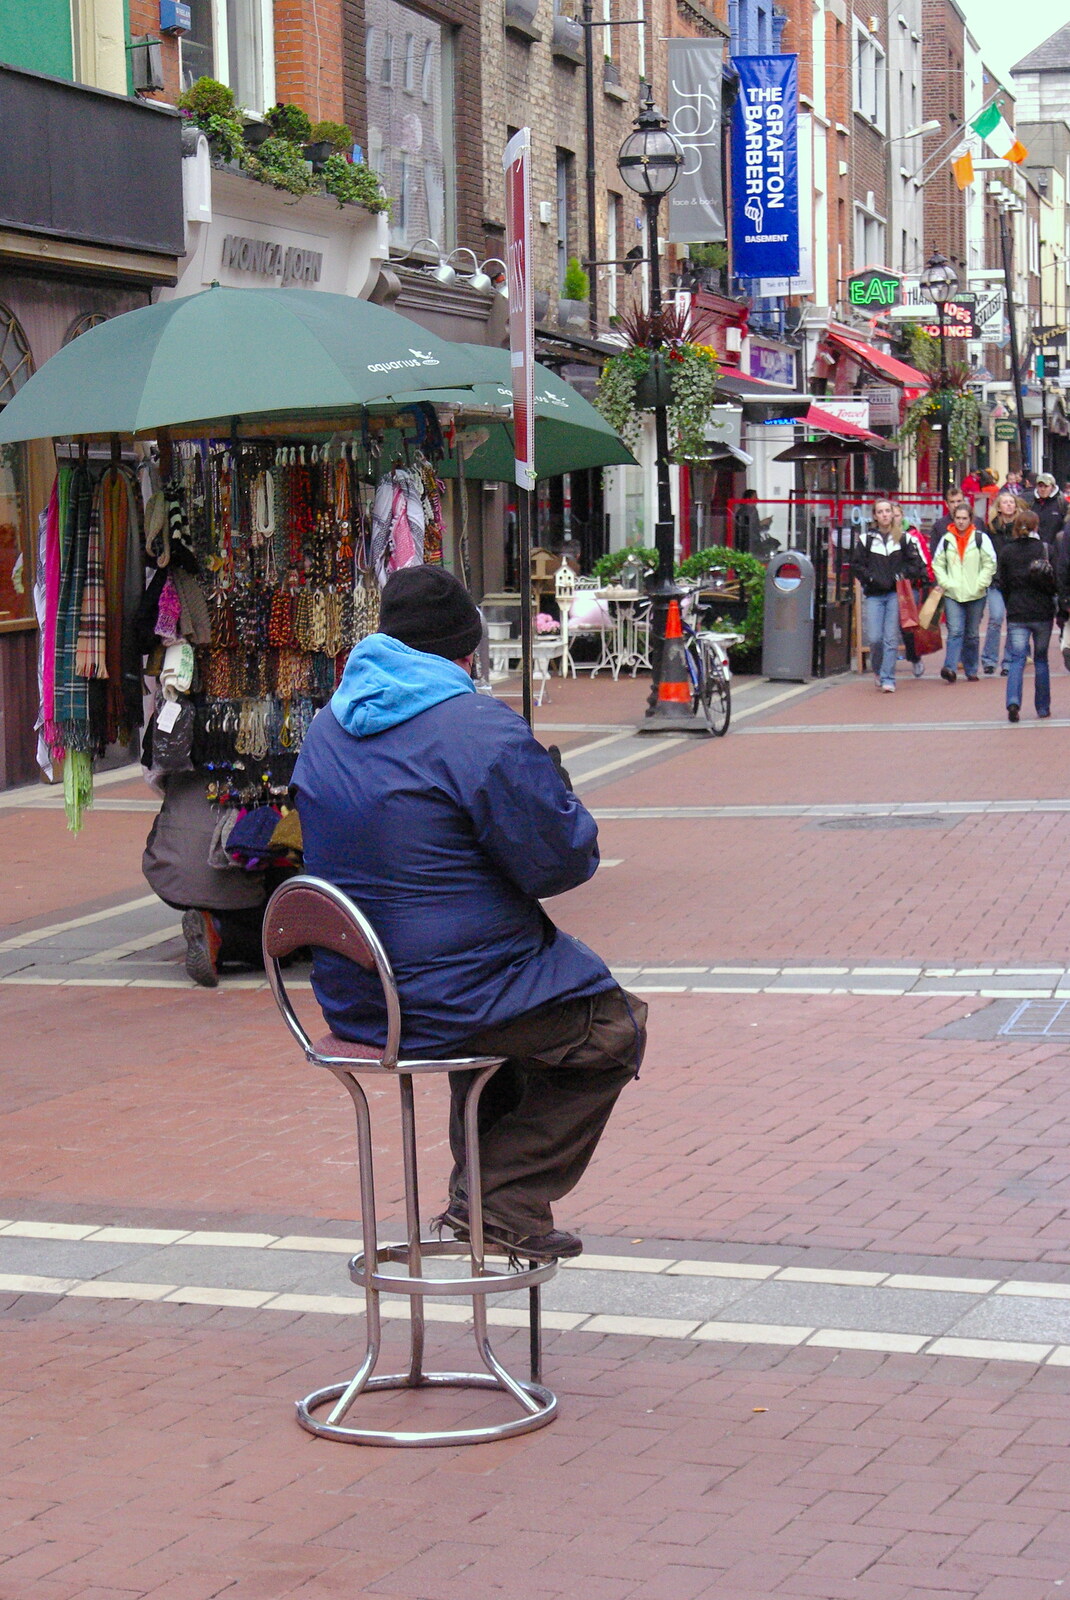 Easter in Dublin, Ireland - 21st March 2008: A dude on a stool